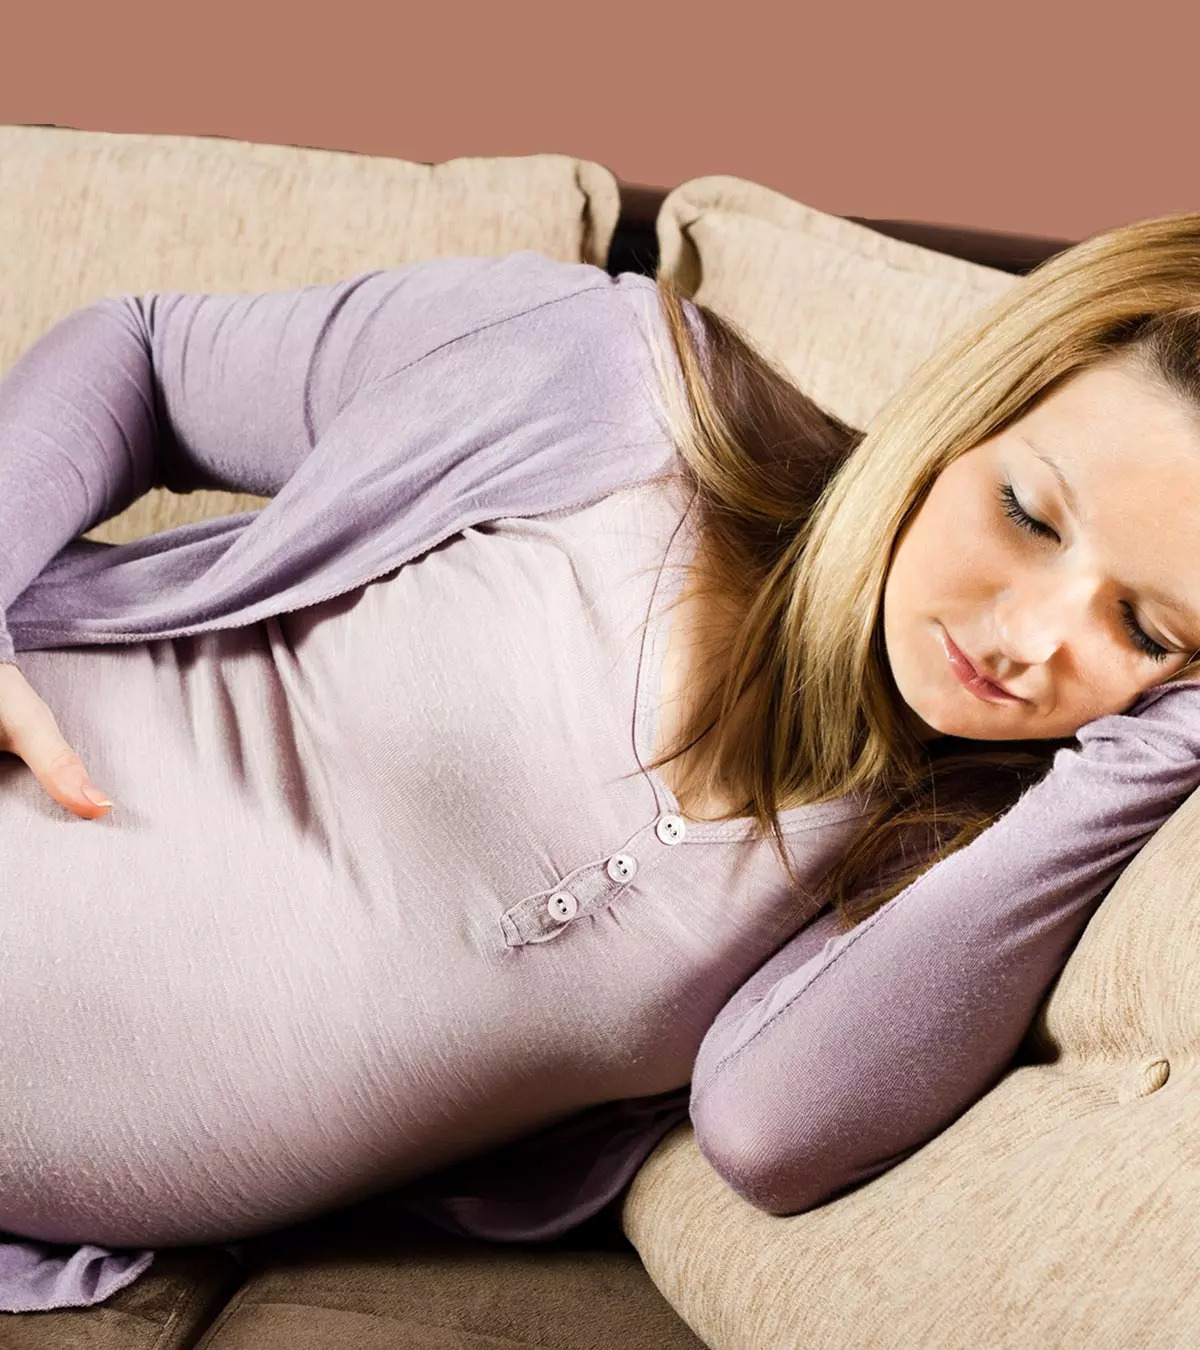 Why Do You Need Bed Rest During Pregnancy? 8 Reasons